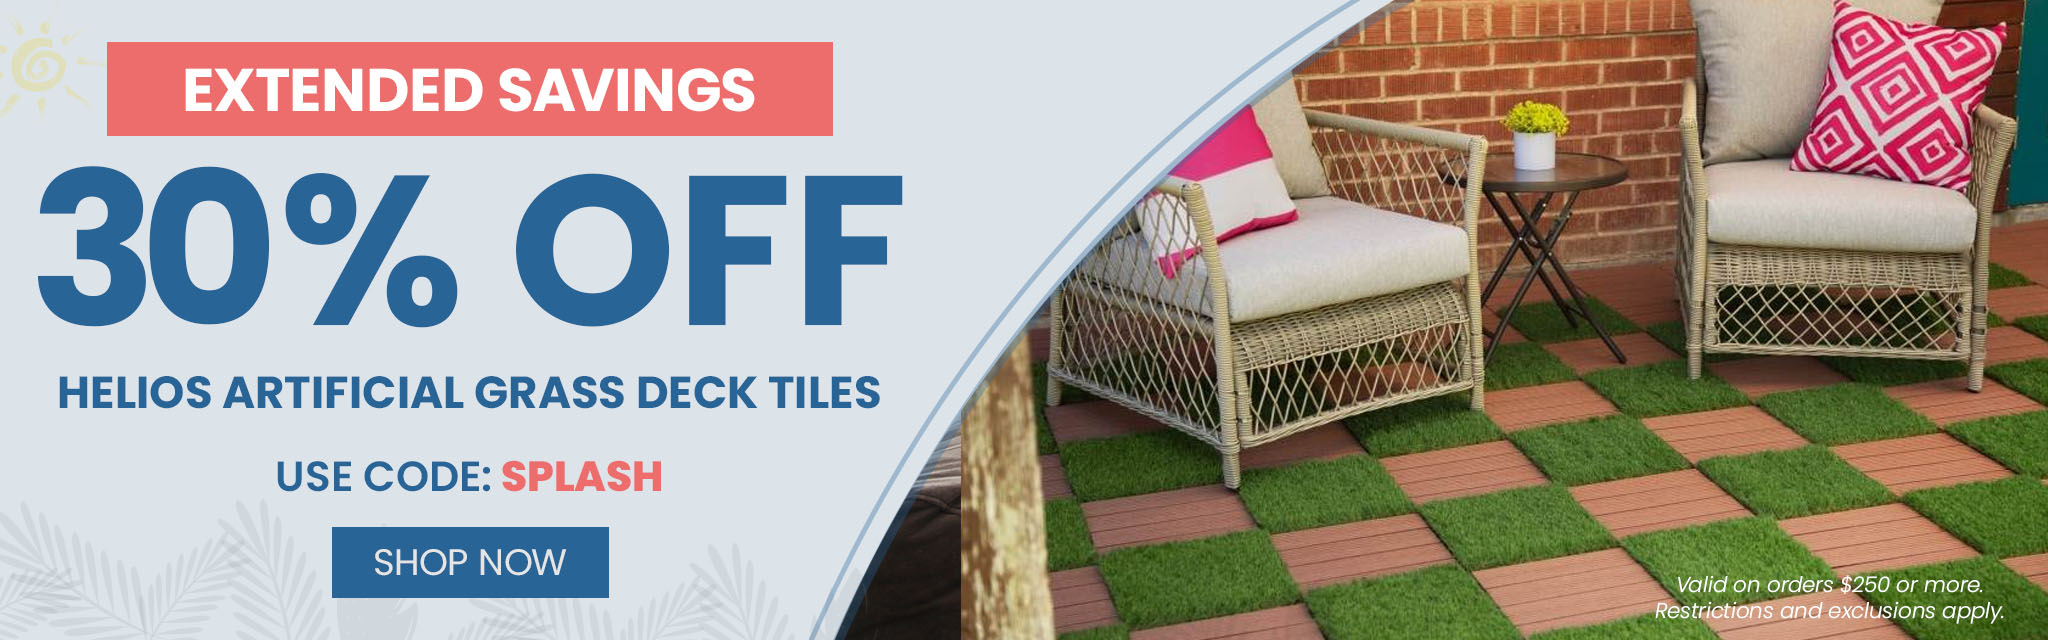 Extended Savings! 30% Off Helios Artificial Grass Deck Tiles. Use code: SPLASH. Shop Now. Valid on orders $250 or more. Restrictions and exclusions apply.